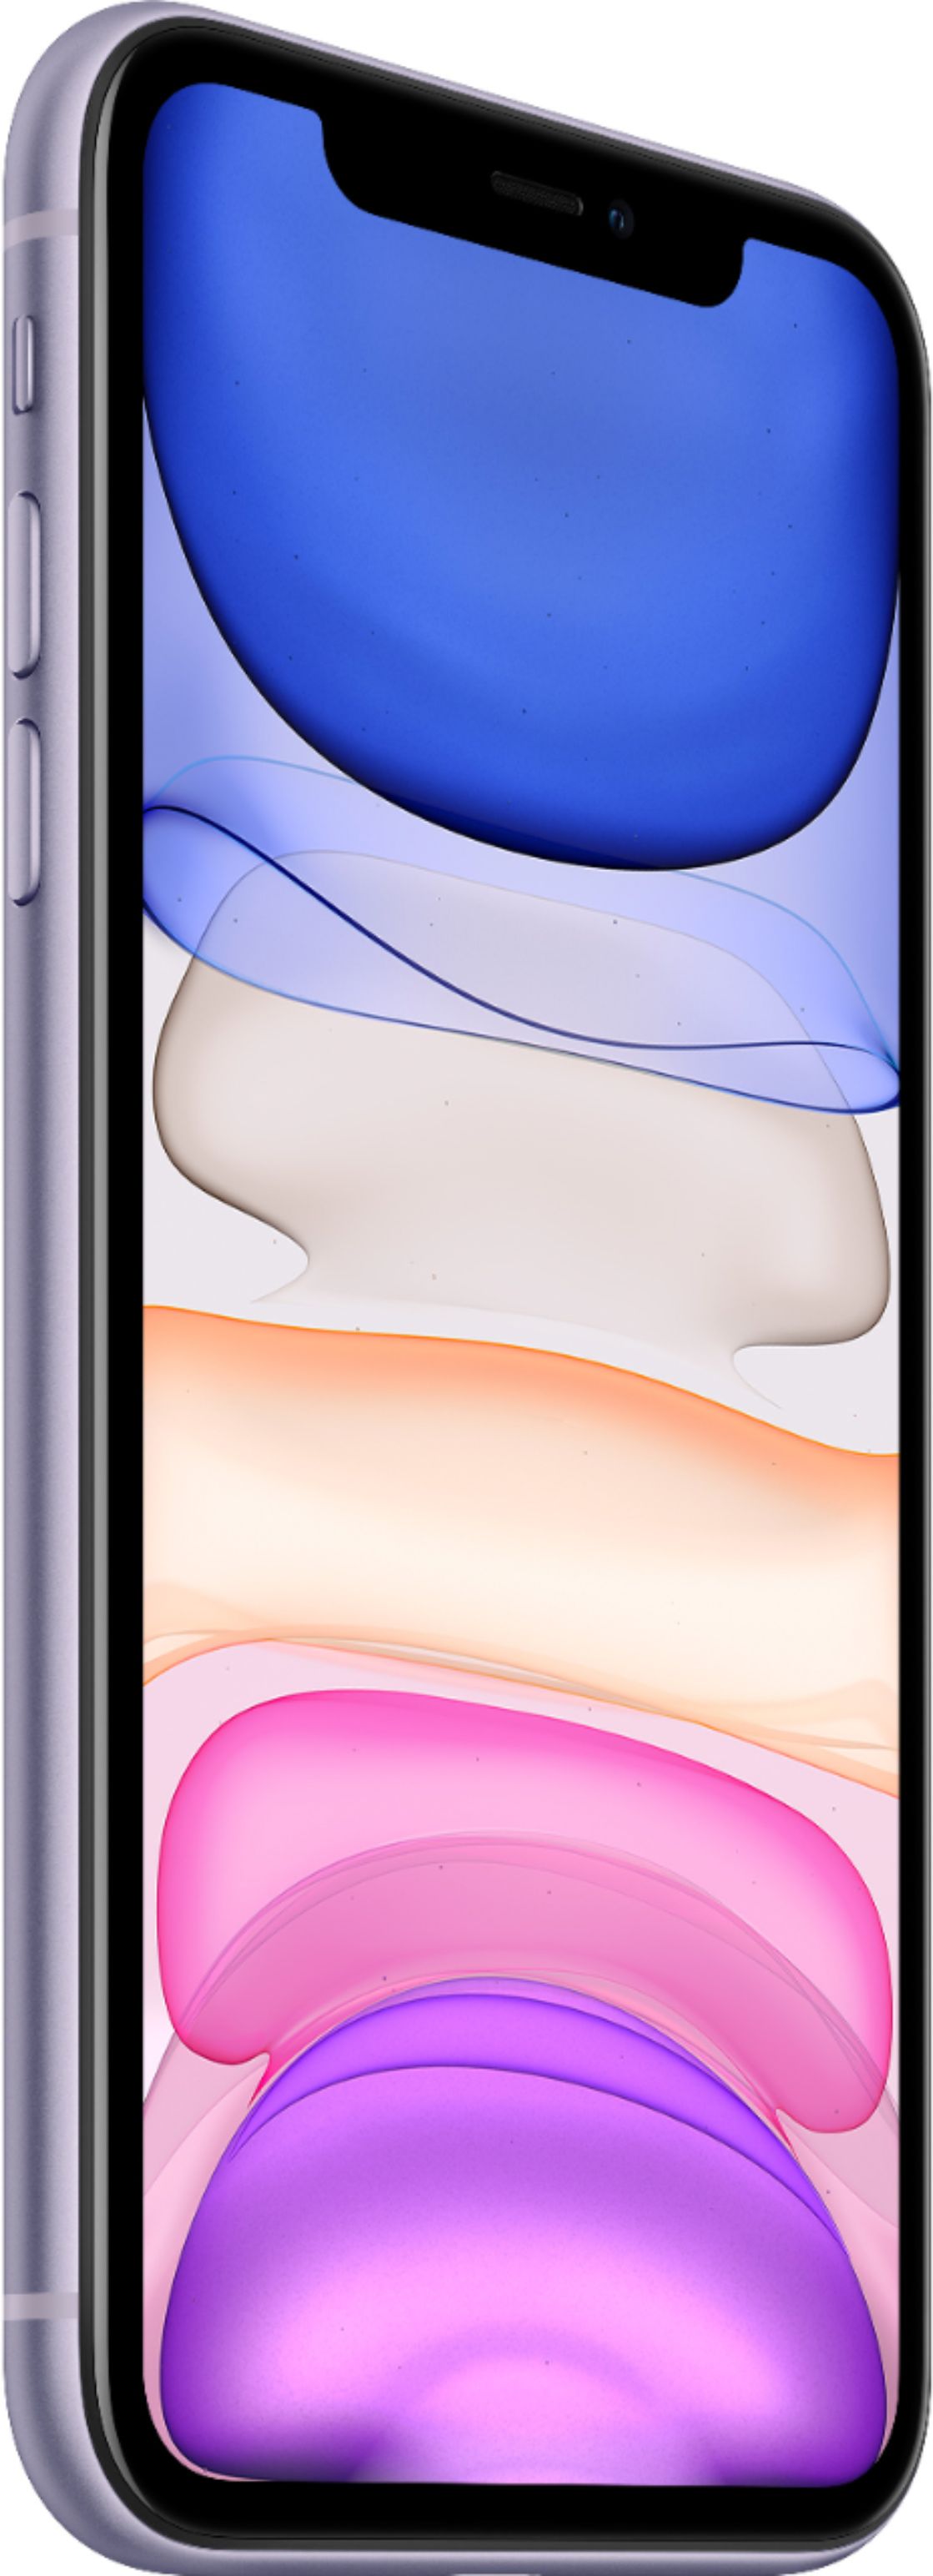 Best Buy: Apple iPhone 11 64GB Purple (AT&T) MWLC2LL/A